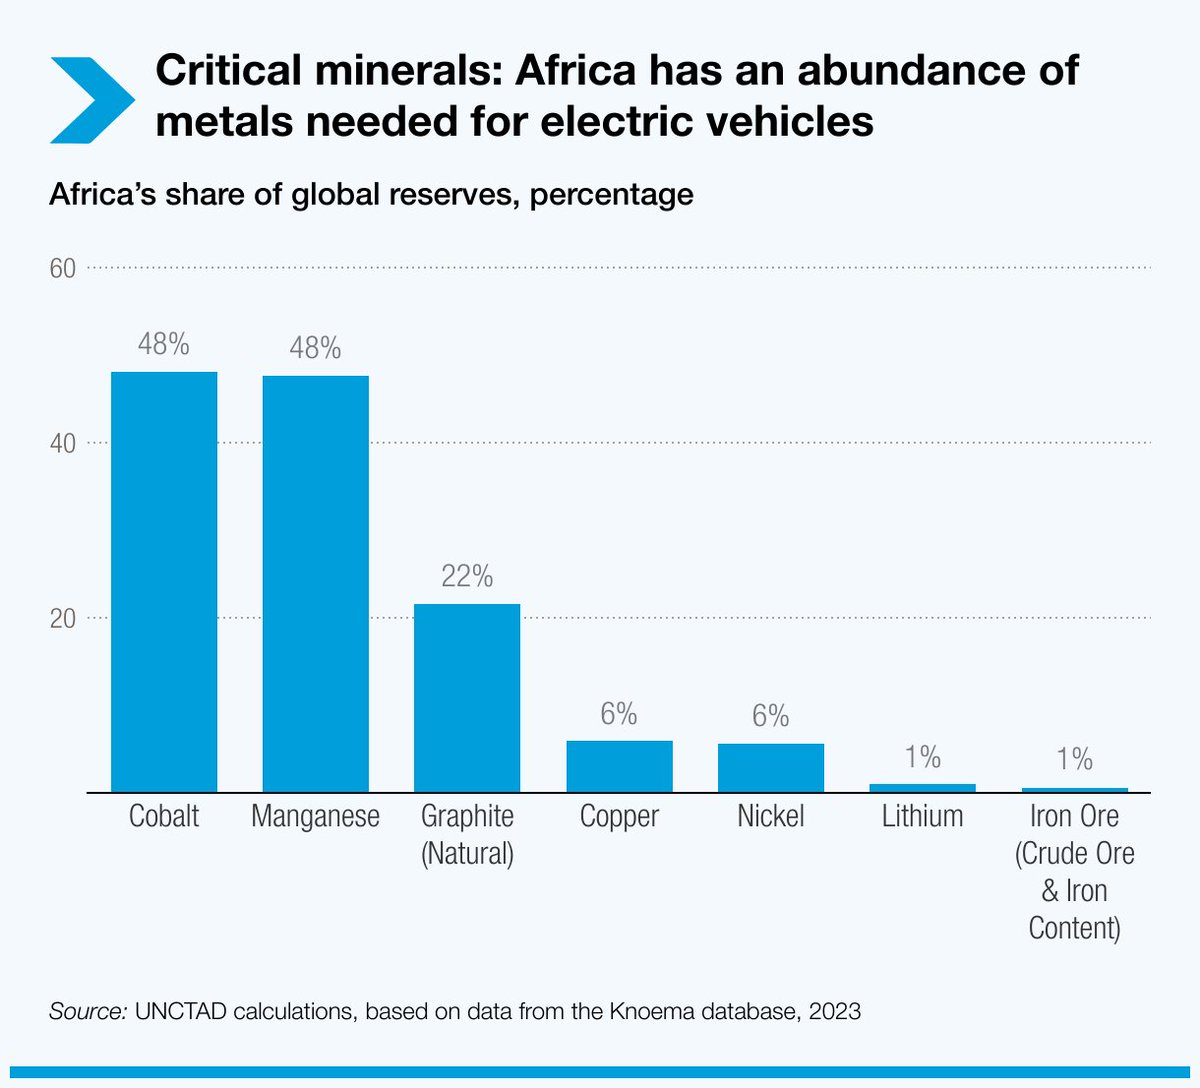 The new critical mineral mining projects needed offer opportunities for developing countries. #Africa boasts over a fifth of the world's reserves for a dozen metals essential to the energy transition, including 19% of those required for electric vehicles. ow.ly/x5Eg50Rtoya